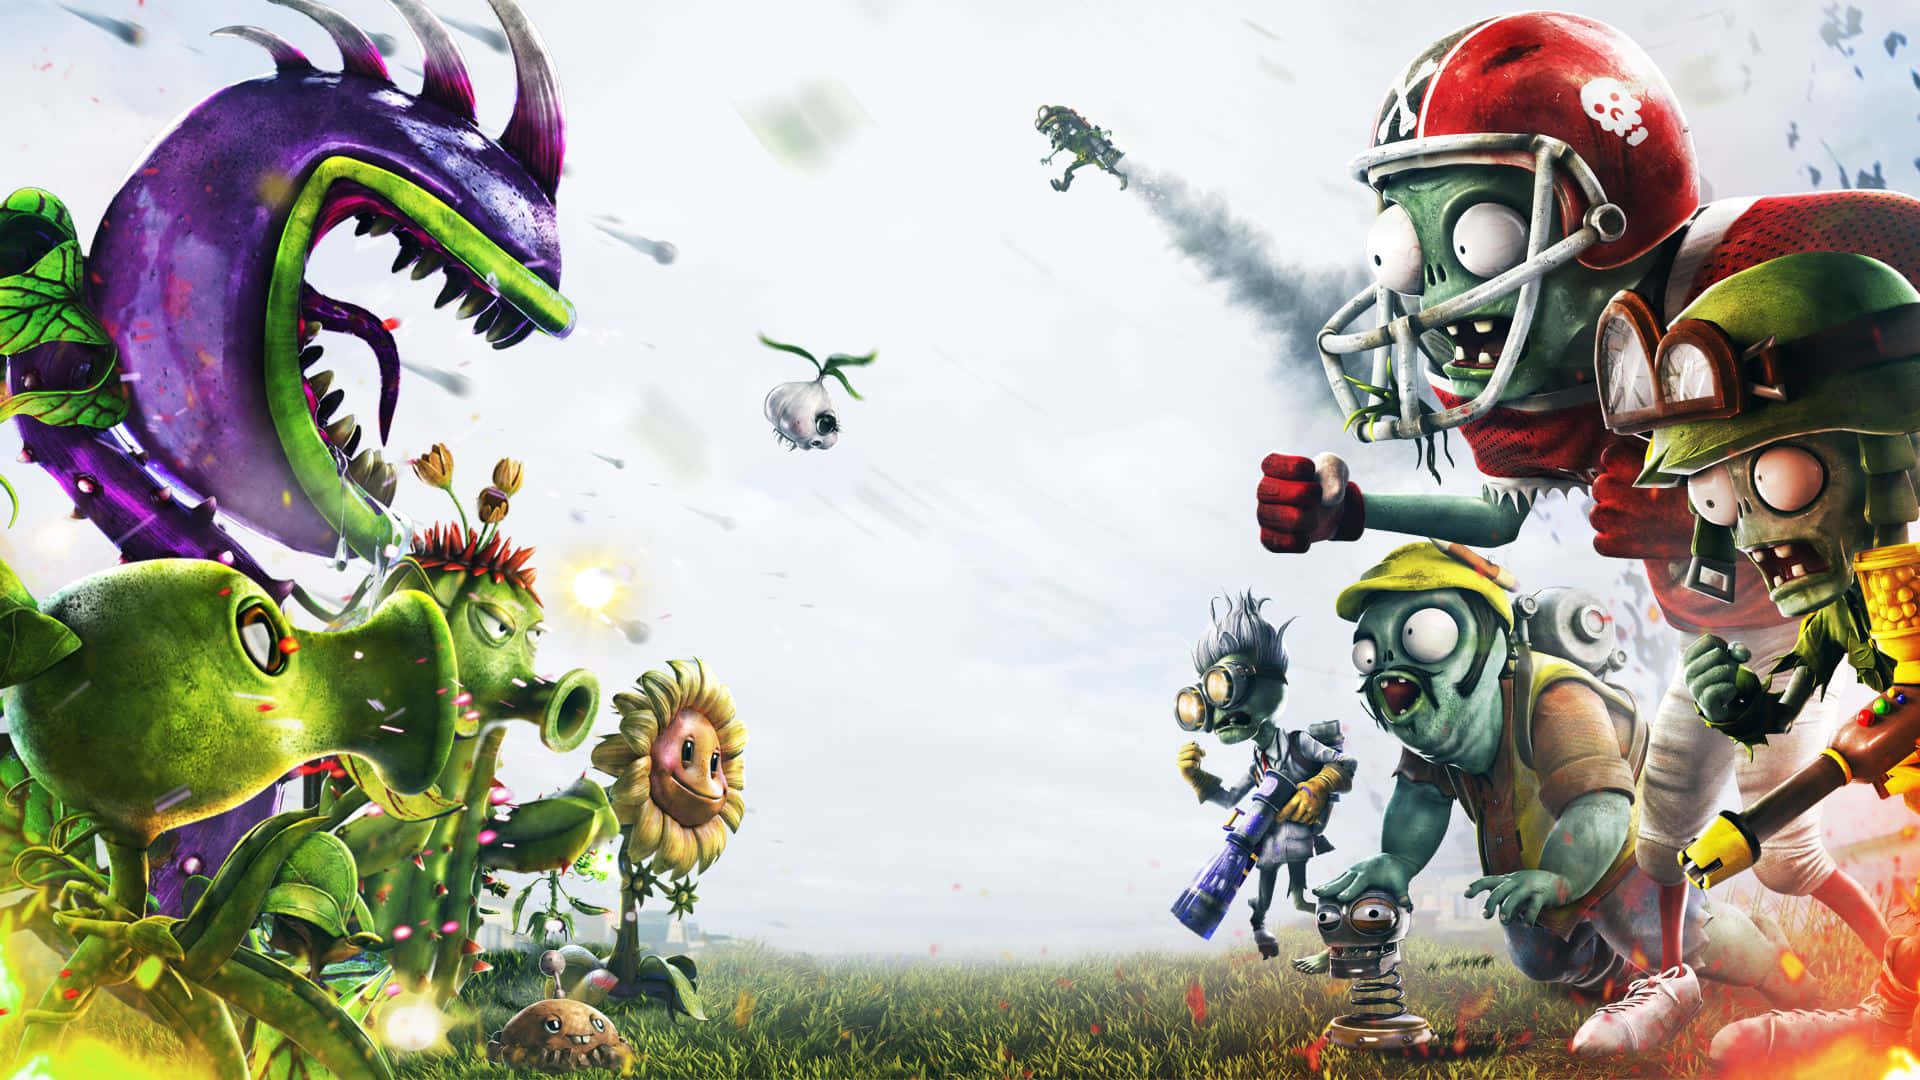 Fend off zombie hordes with powerful plants